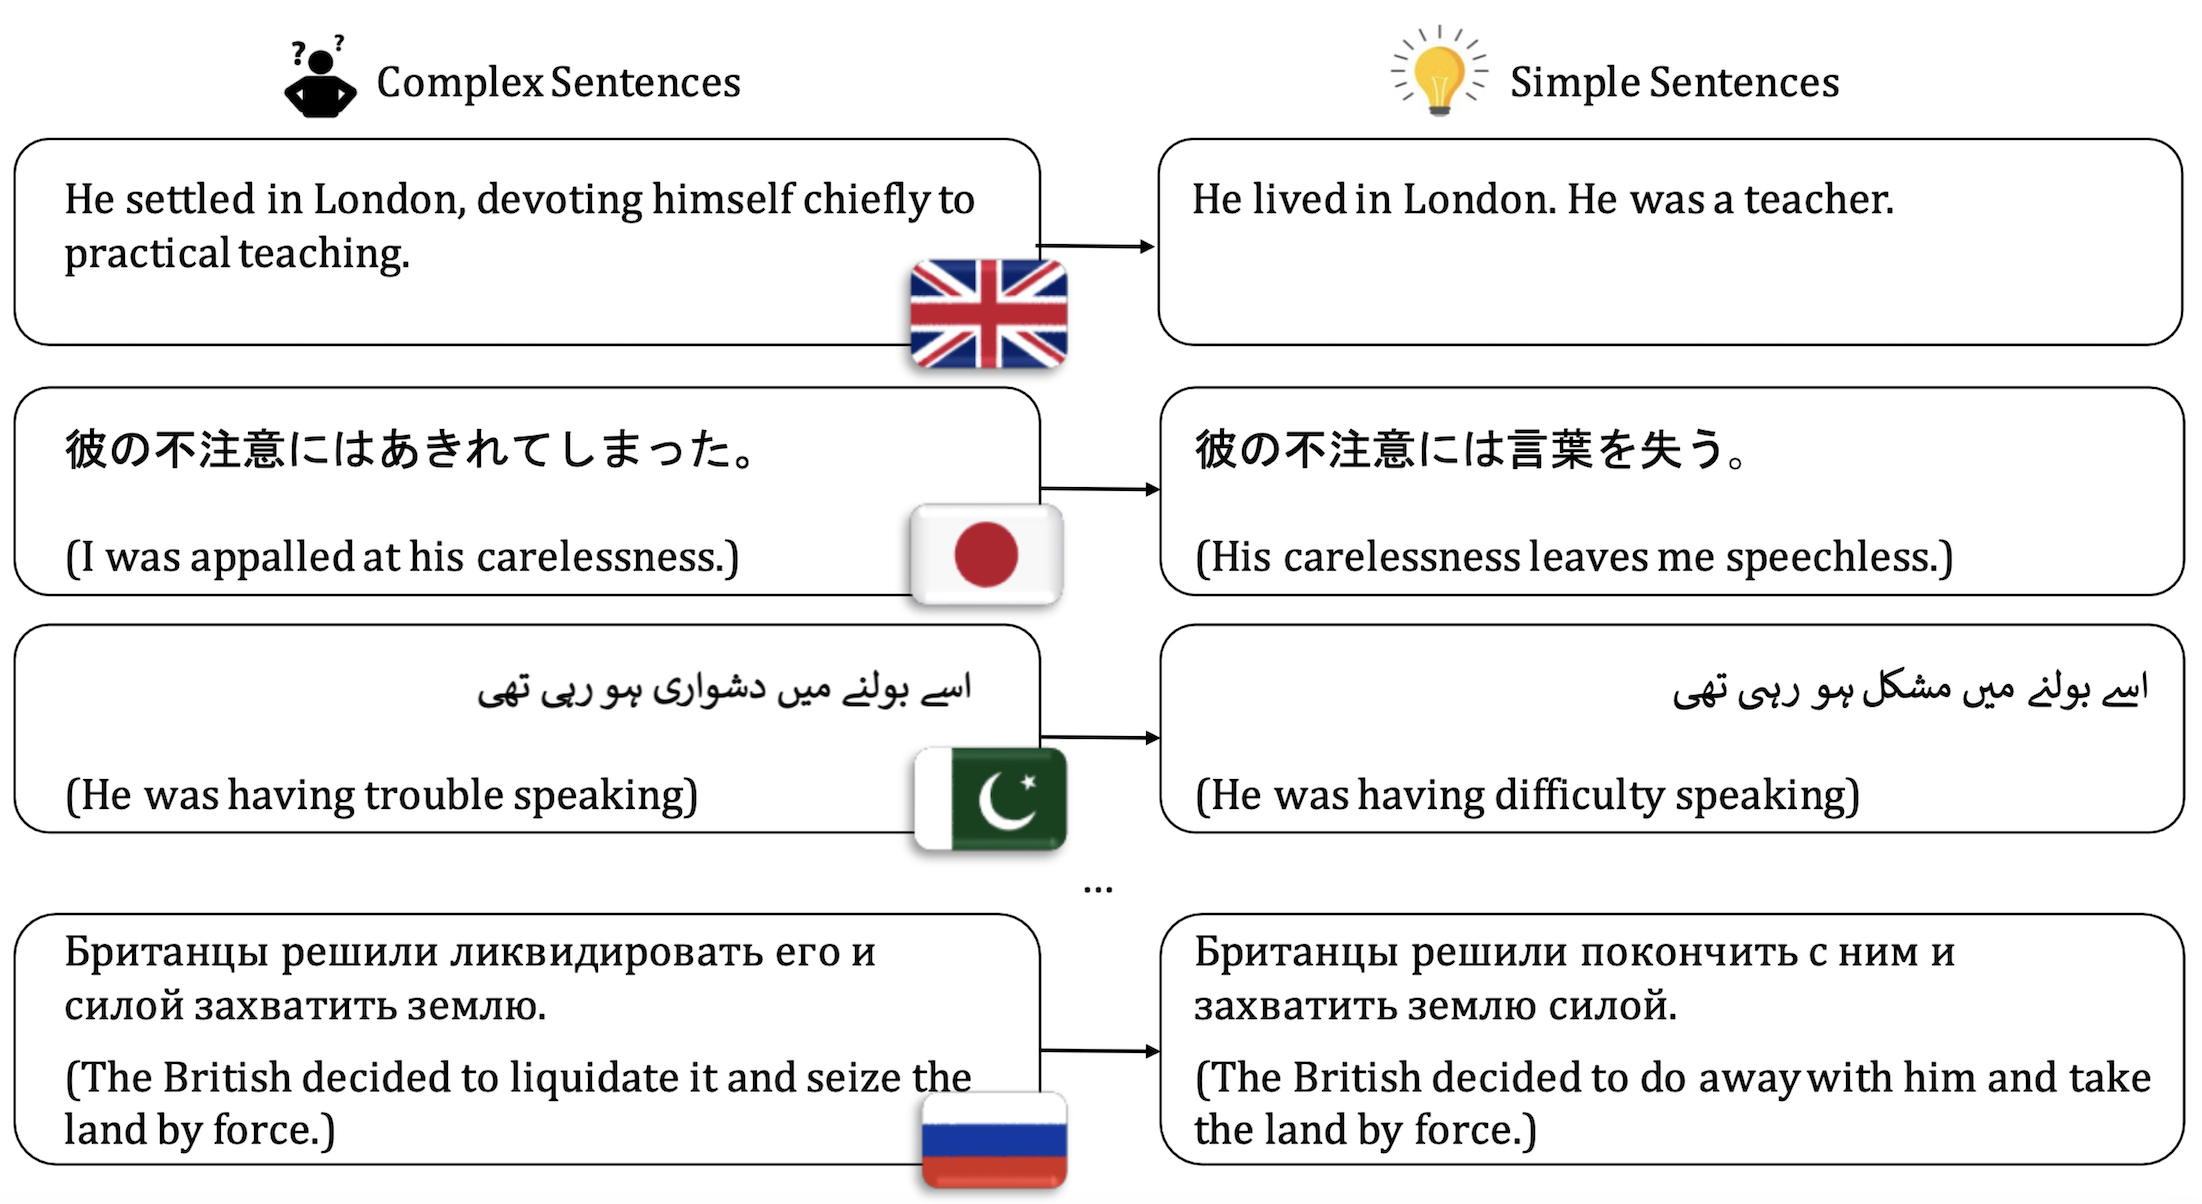 Figure showing four complex and simple sentence pairs.  One pair in English, one in Japanese, one in Urdu, and one in Russian.  The English complex sentence reads "He settled in London, devoting himself chiefly to practical teaching." which is paired with the simple sentence "He lived in London. He was a teacher."